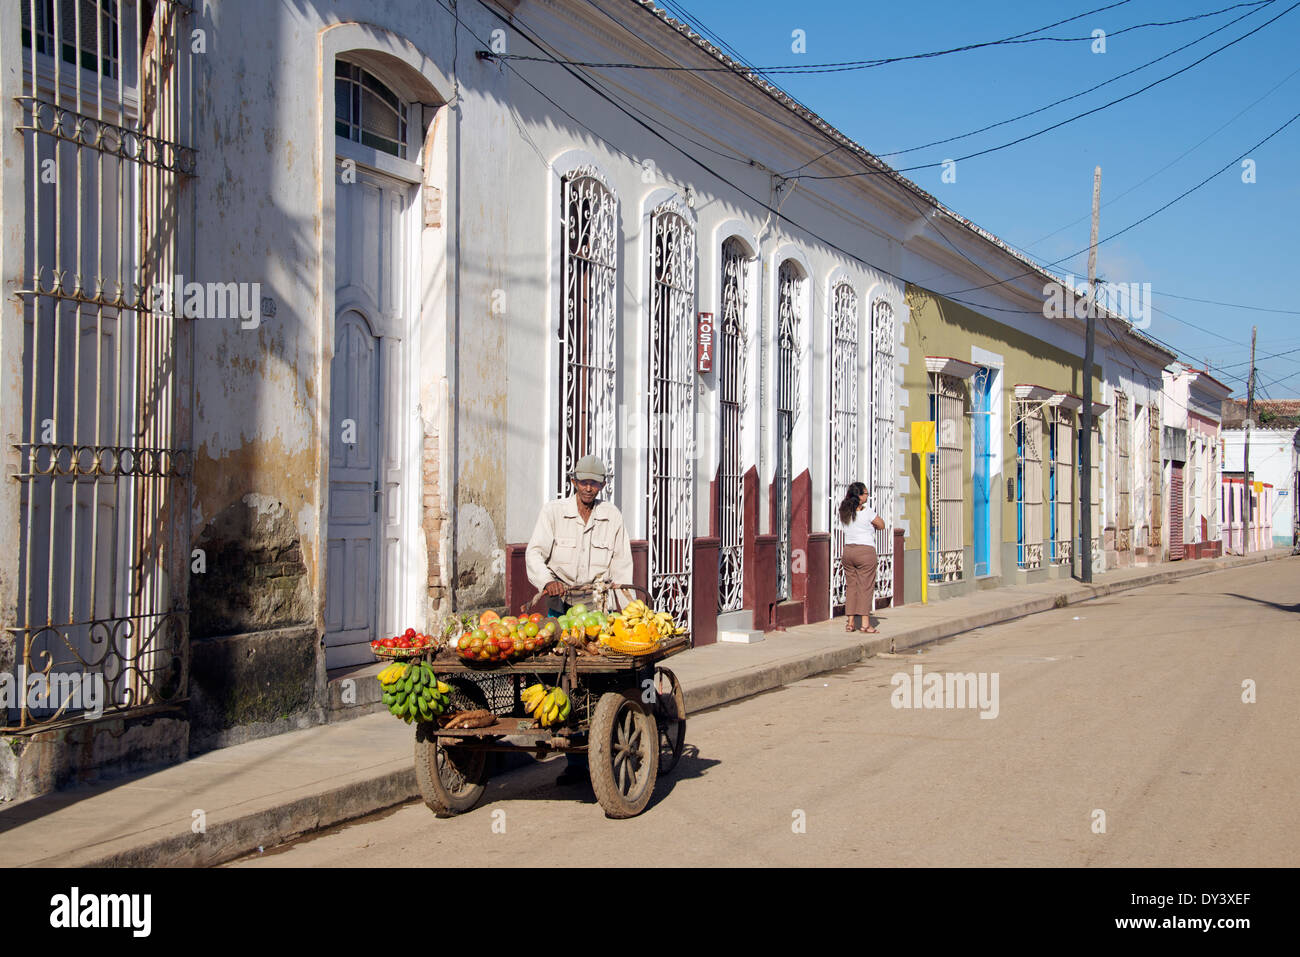 Mobile fruit and vegetable seller back street Remedios Cuba Stock Photo